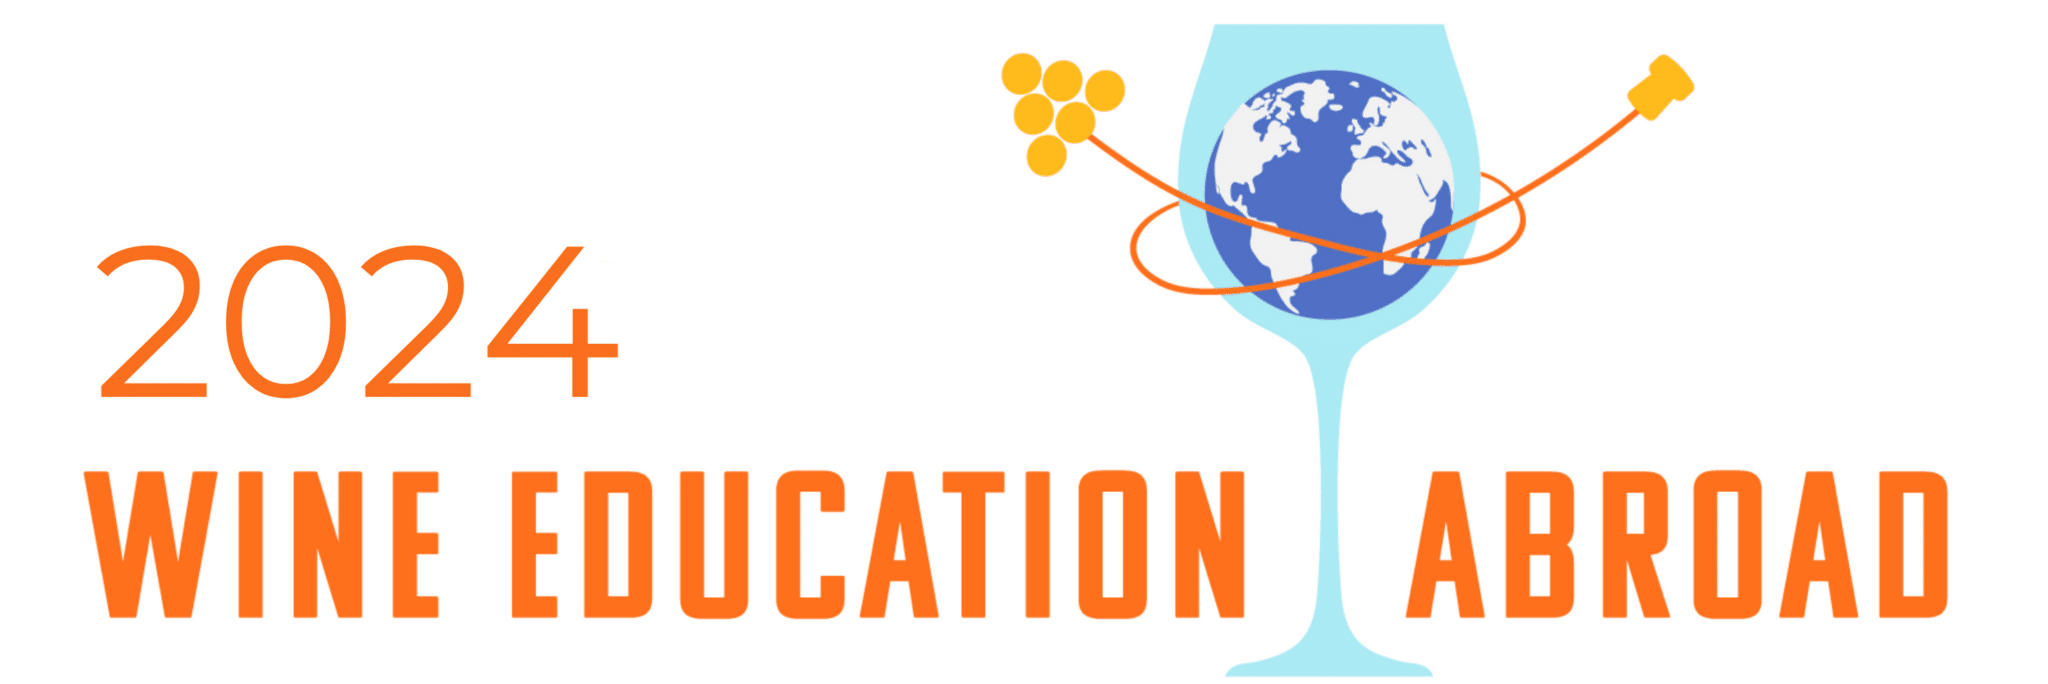 Wine Education Abroad 2024 Landing Page